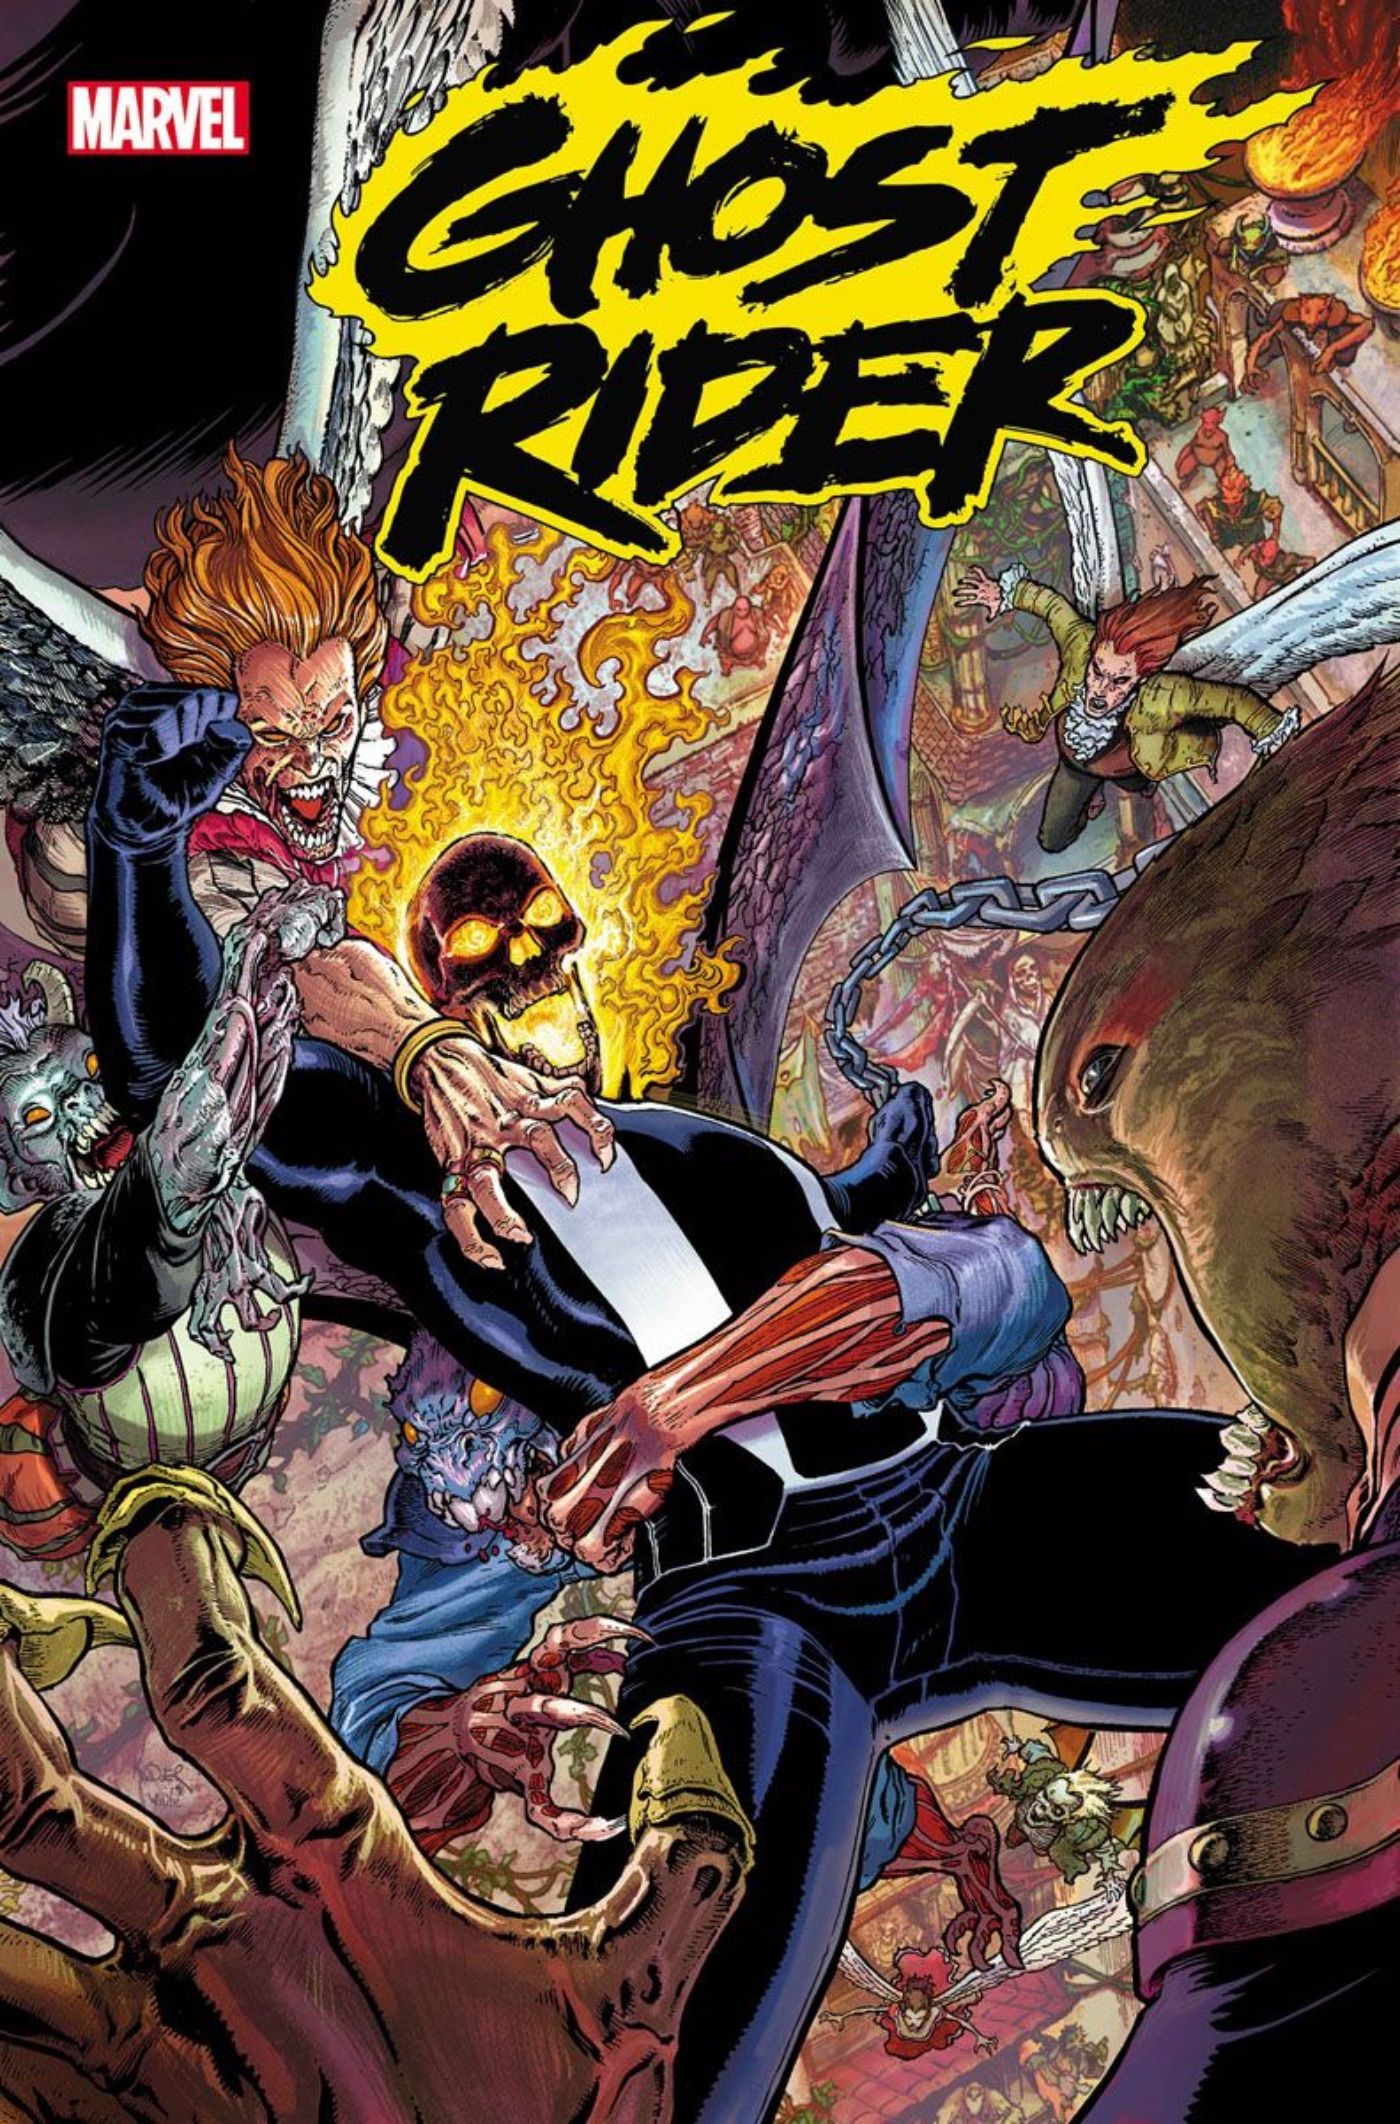 What Was Next For Ghost Rider (Before King in Black Cancellation)